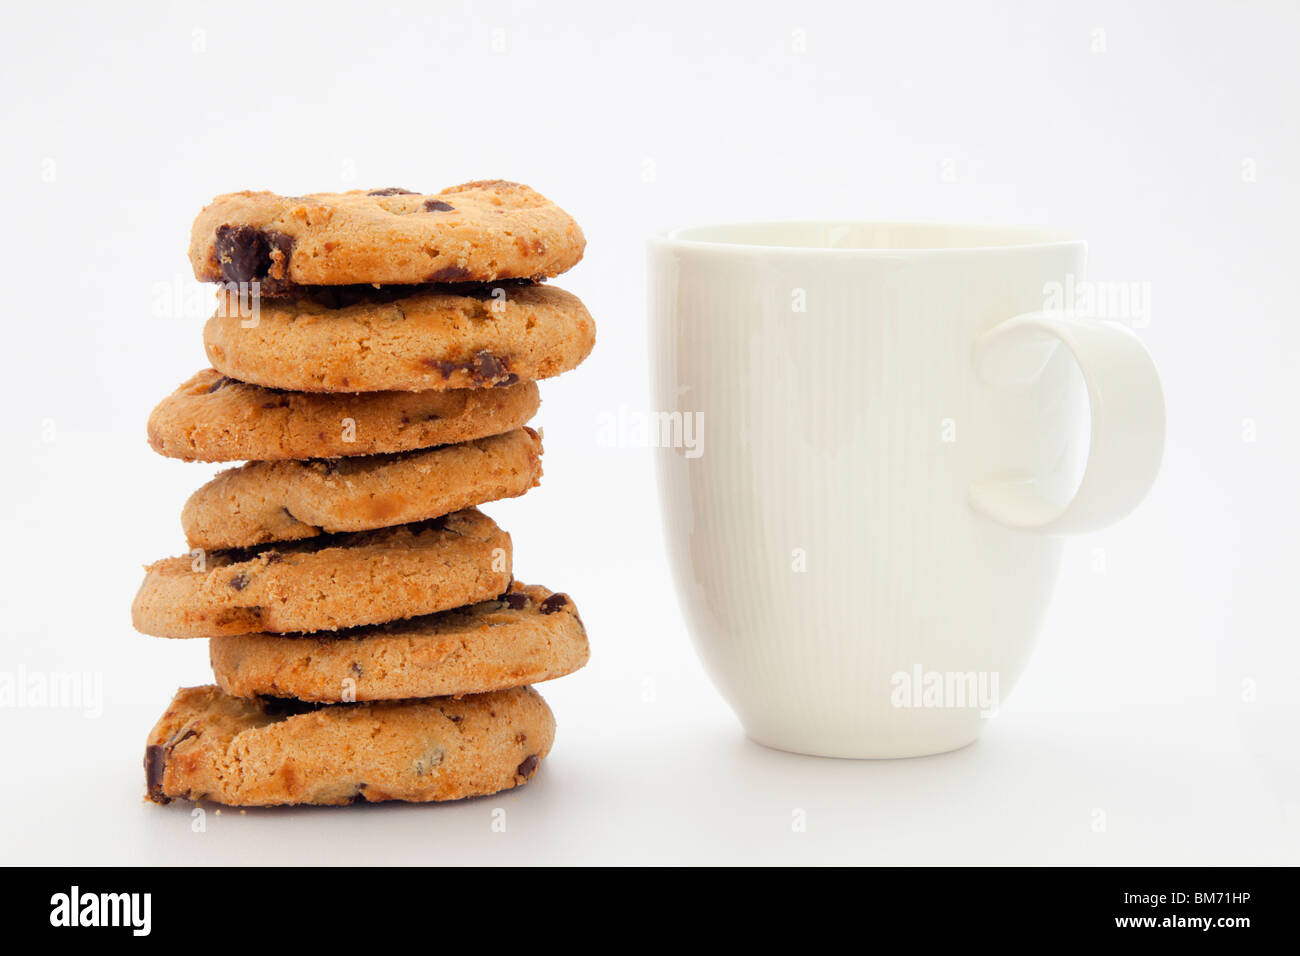 Pile stack of chocolate chip biscuits and white mug of tea or coffee on a plain background. England, UK, Britain Stock Photo